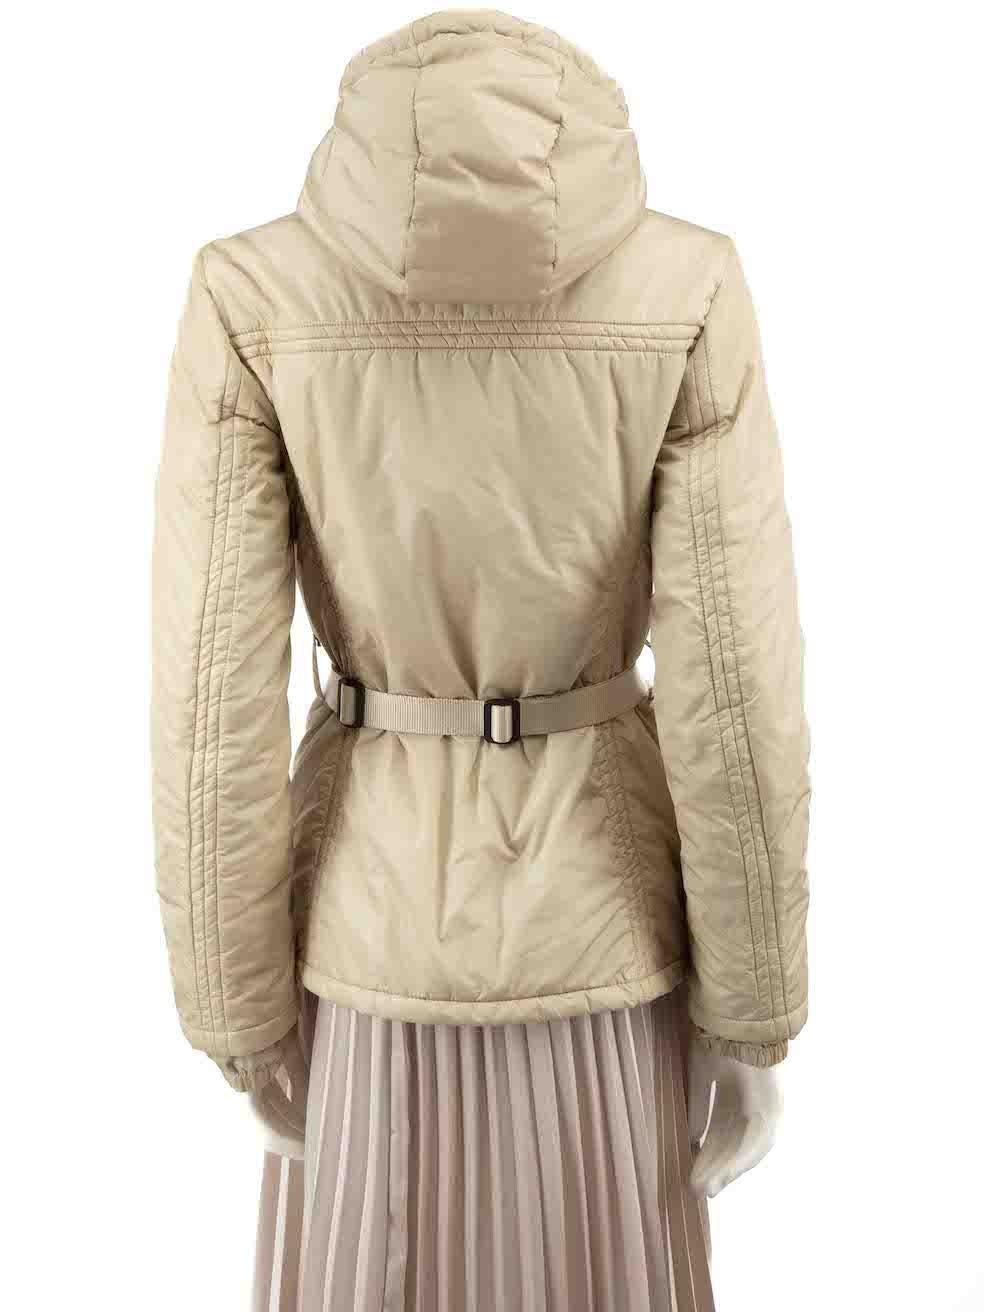 Prada Beige Hooded Shell Jacket Size S In Good Condition For Sale In London, GB